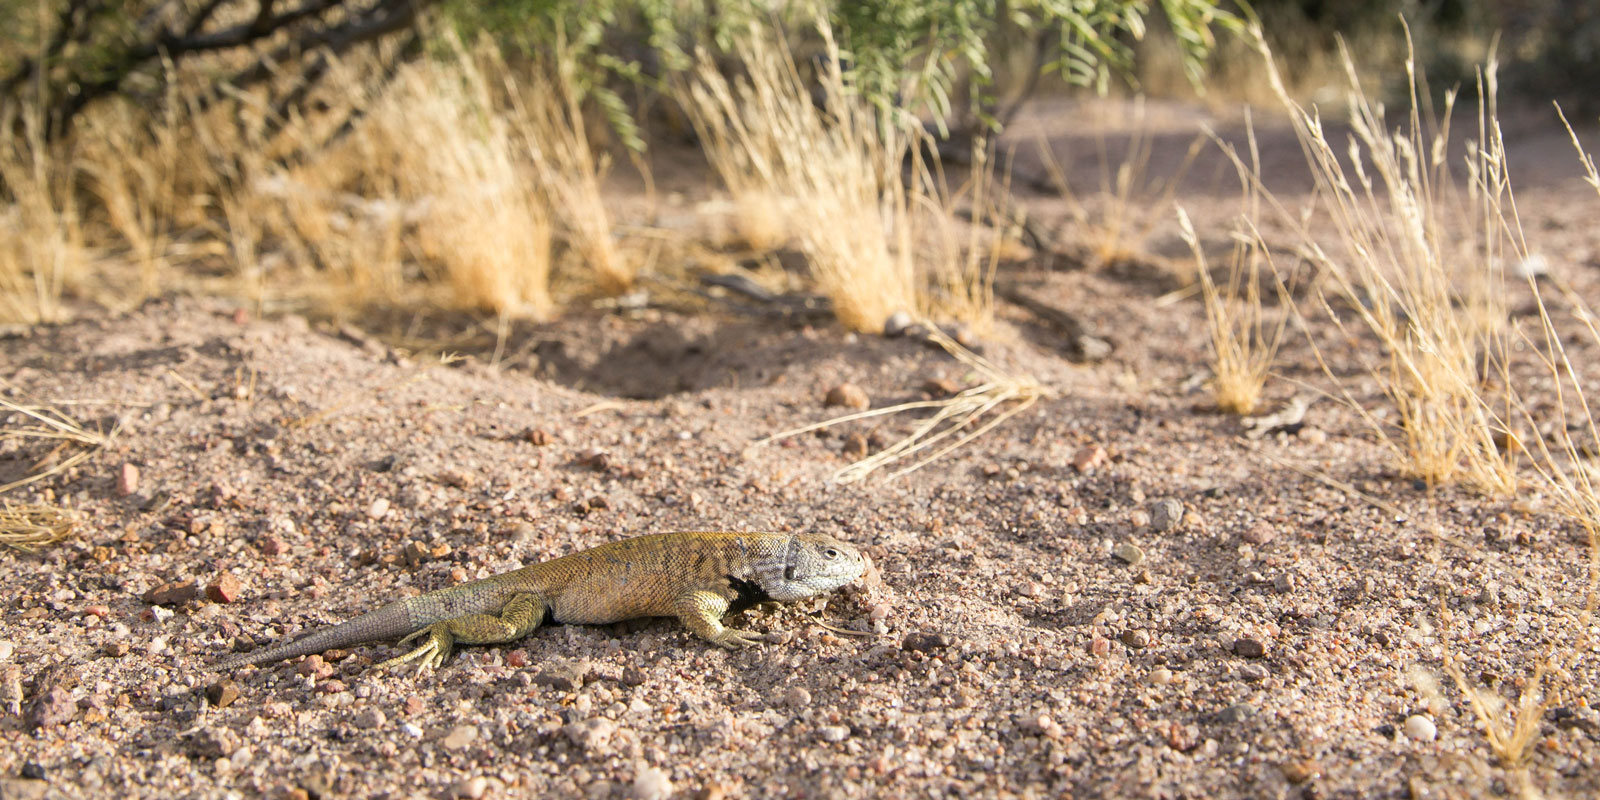 A light brown colored lizard on the sand with trees in the background